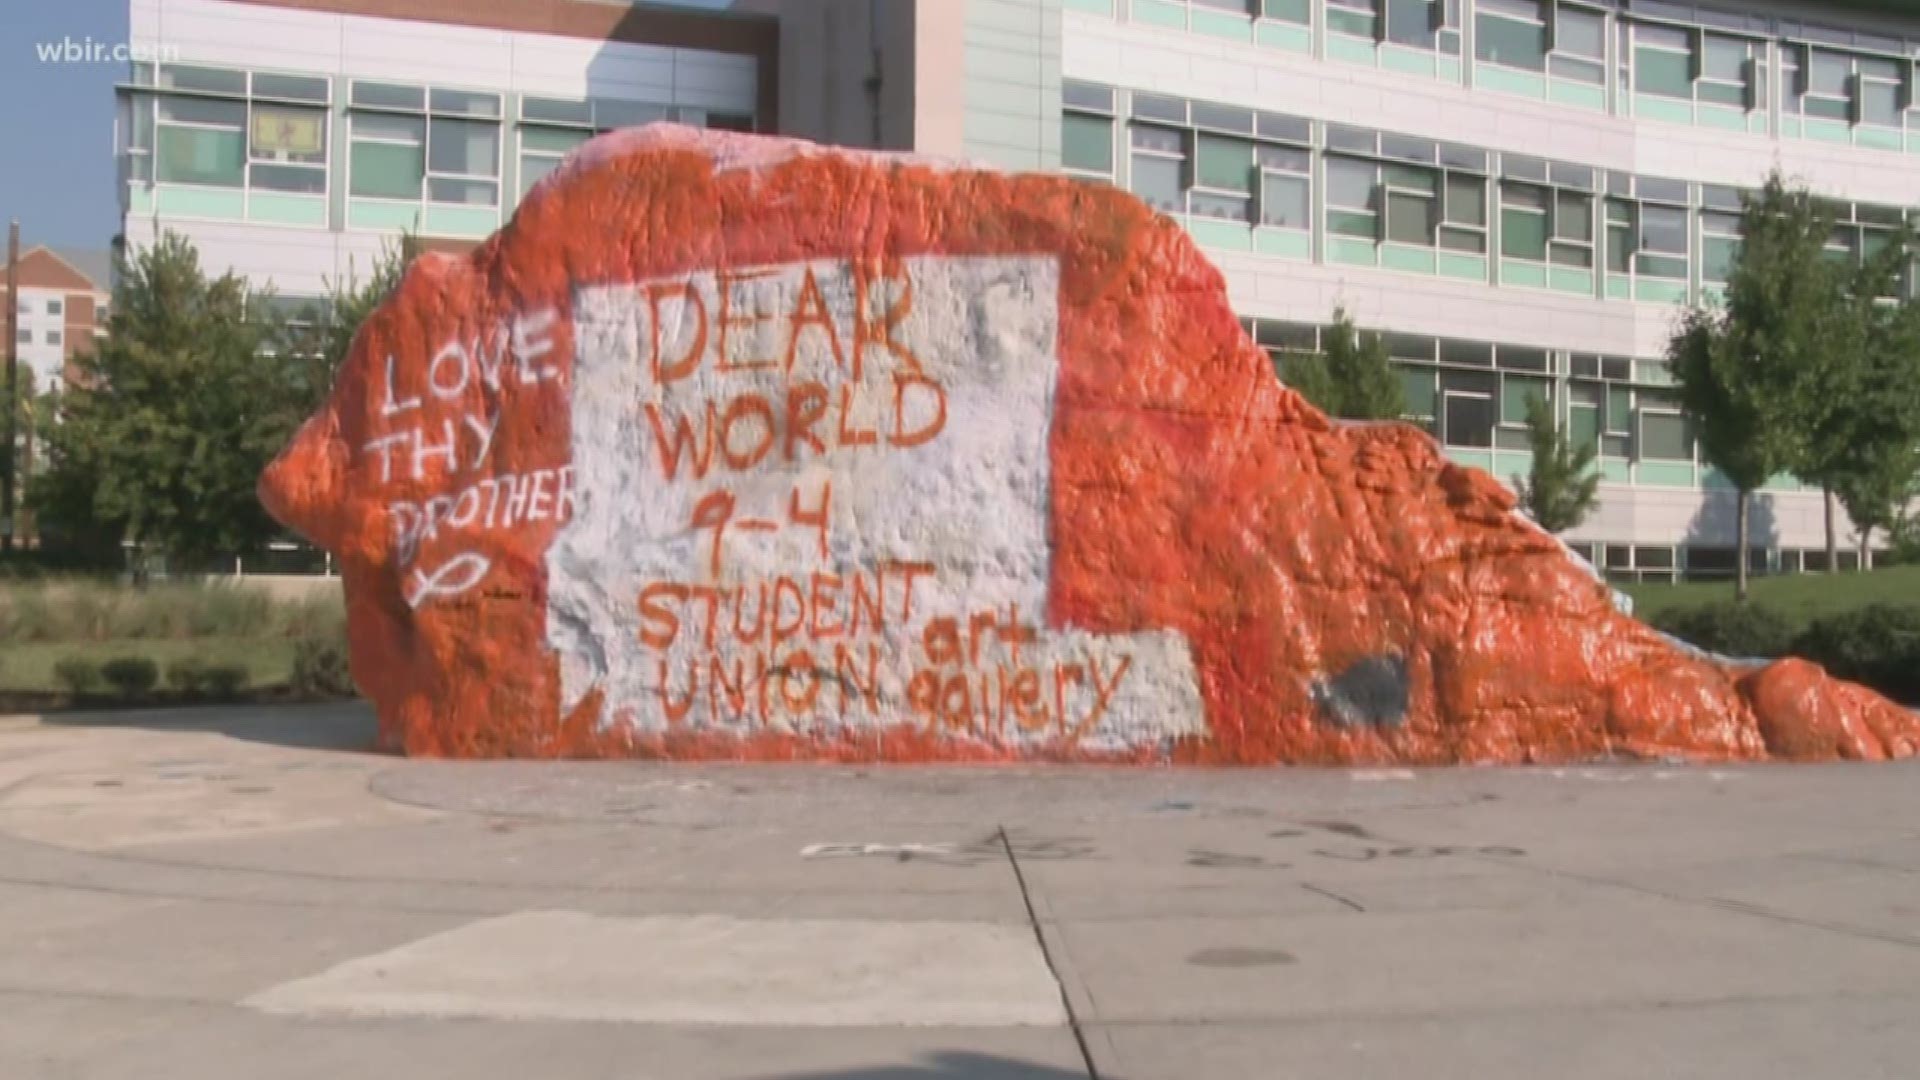 Some UT students said the school isn't doing enough to combat hate speech painted on The Rock.